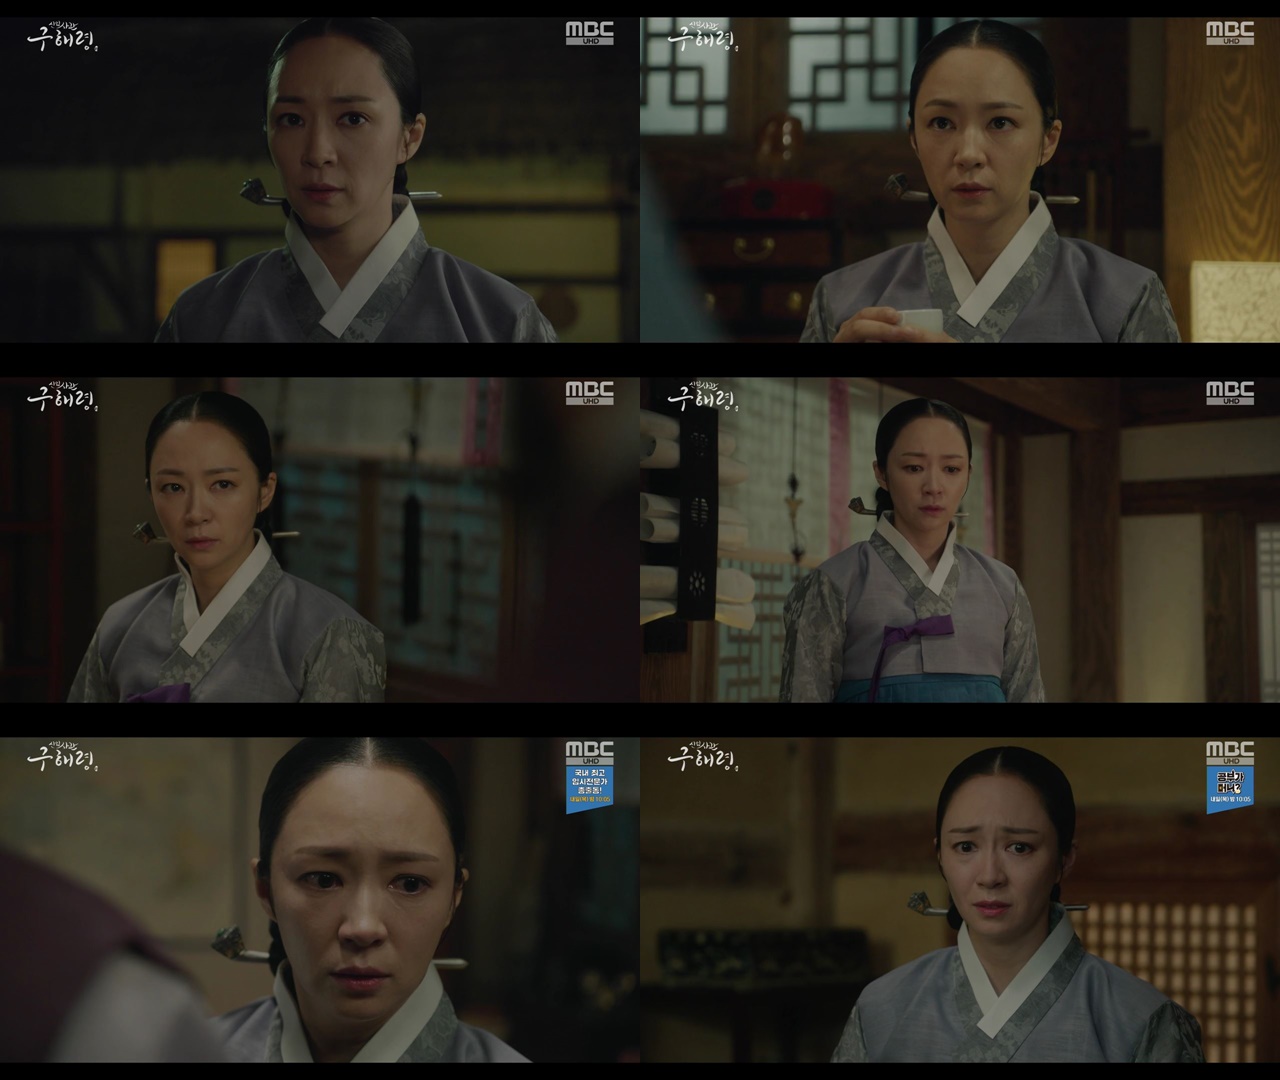 The new employee, Na Hae-ryung, led the dramatic development and became a standout.Jeon Ye-seo, who has been curious as a person of interest who has accumulated in the veil since his appearance in the MBC drama Na Hae-ryung, has been repeatedly revealed, and has been involved in the past, including two main characters, Na Hae-ryung, Lee Rim (Cha Eun-woo), and other unexplained stories from the royal family. Its coming out.In particular, the mother and Na Hae-ryung, who made a kite in Pyeongan-do at the end of the 25-26 episode, reunited and gathered together to finance (Fairy Hwan), and once again a new relationship was revealed and focused attention.Na Hae-ryungs tearful gaze, which realized that she was the daughter of Seoraewon teacher in the past, stimulated curiosity and gave an intense ending.Following the Daewon Daegun Irim, Na Hae-ryung, the role of the mother paintings deeply embedded in their stories is being reexamined.In addition, it is clear that the royal family is facing Seoraewon in the tension that closely monitors those related to Seoraewon including the mother painting, and it is clear that the clue of all ties is toward Seoraewon.Jeon Ye-seo leads the complex and multifaceted narrative given to the mother-of-pearl with high immersion and probability.It is completing the dramatic development that enhances the fun of the work by adding not only the acting but also the heavy presence that stands out the given character.With the attention being paid to the performance of Jeon Ye-seo, who has emerged as the key player of the new employee, Na Hae-ryung, we can see the story of the new phase through the 27-28 episode today.